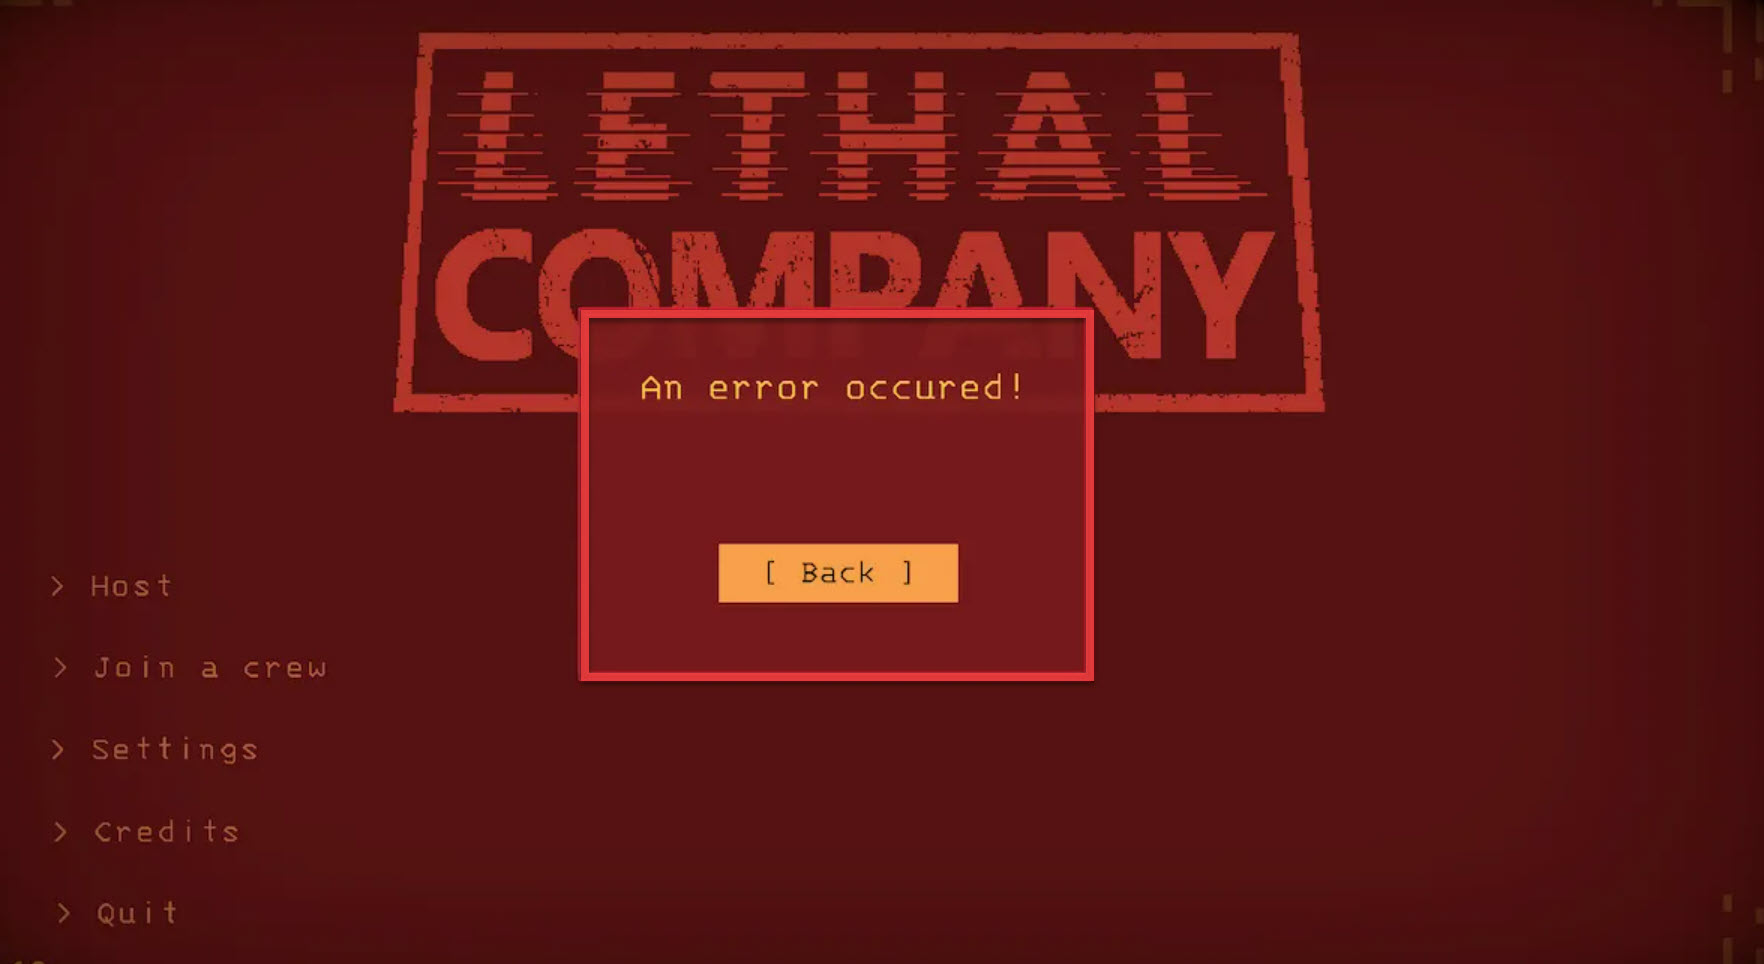 Lethal Company An Error Occurred